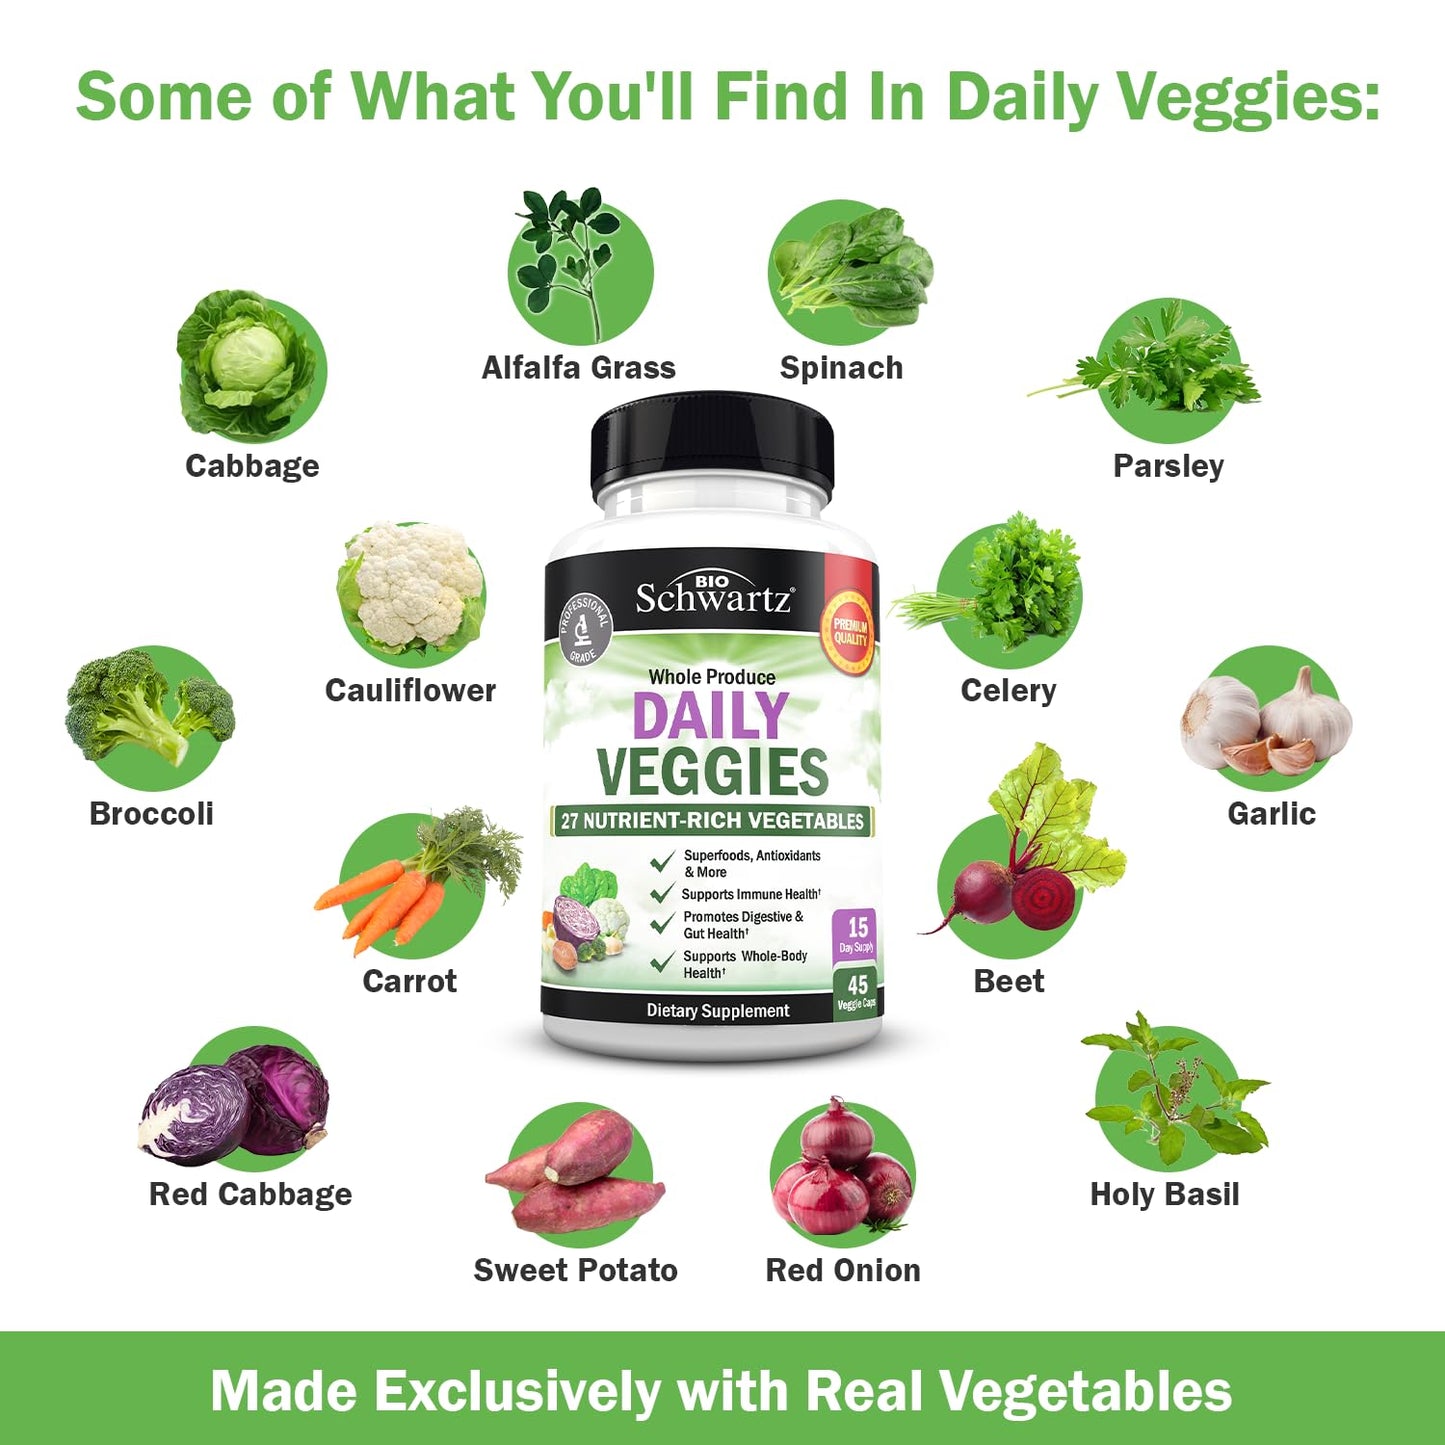 Daily Fruits and Veggies Supplement for Women and Men - 47 Whole Food Fruits and Vegetables - Diverse Natural Balance of Vitamins Minerals and Noni - 45 Fruit Capsules, 45 Veggie Capsules (2 Pack)